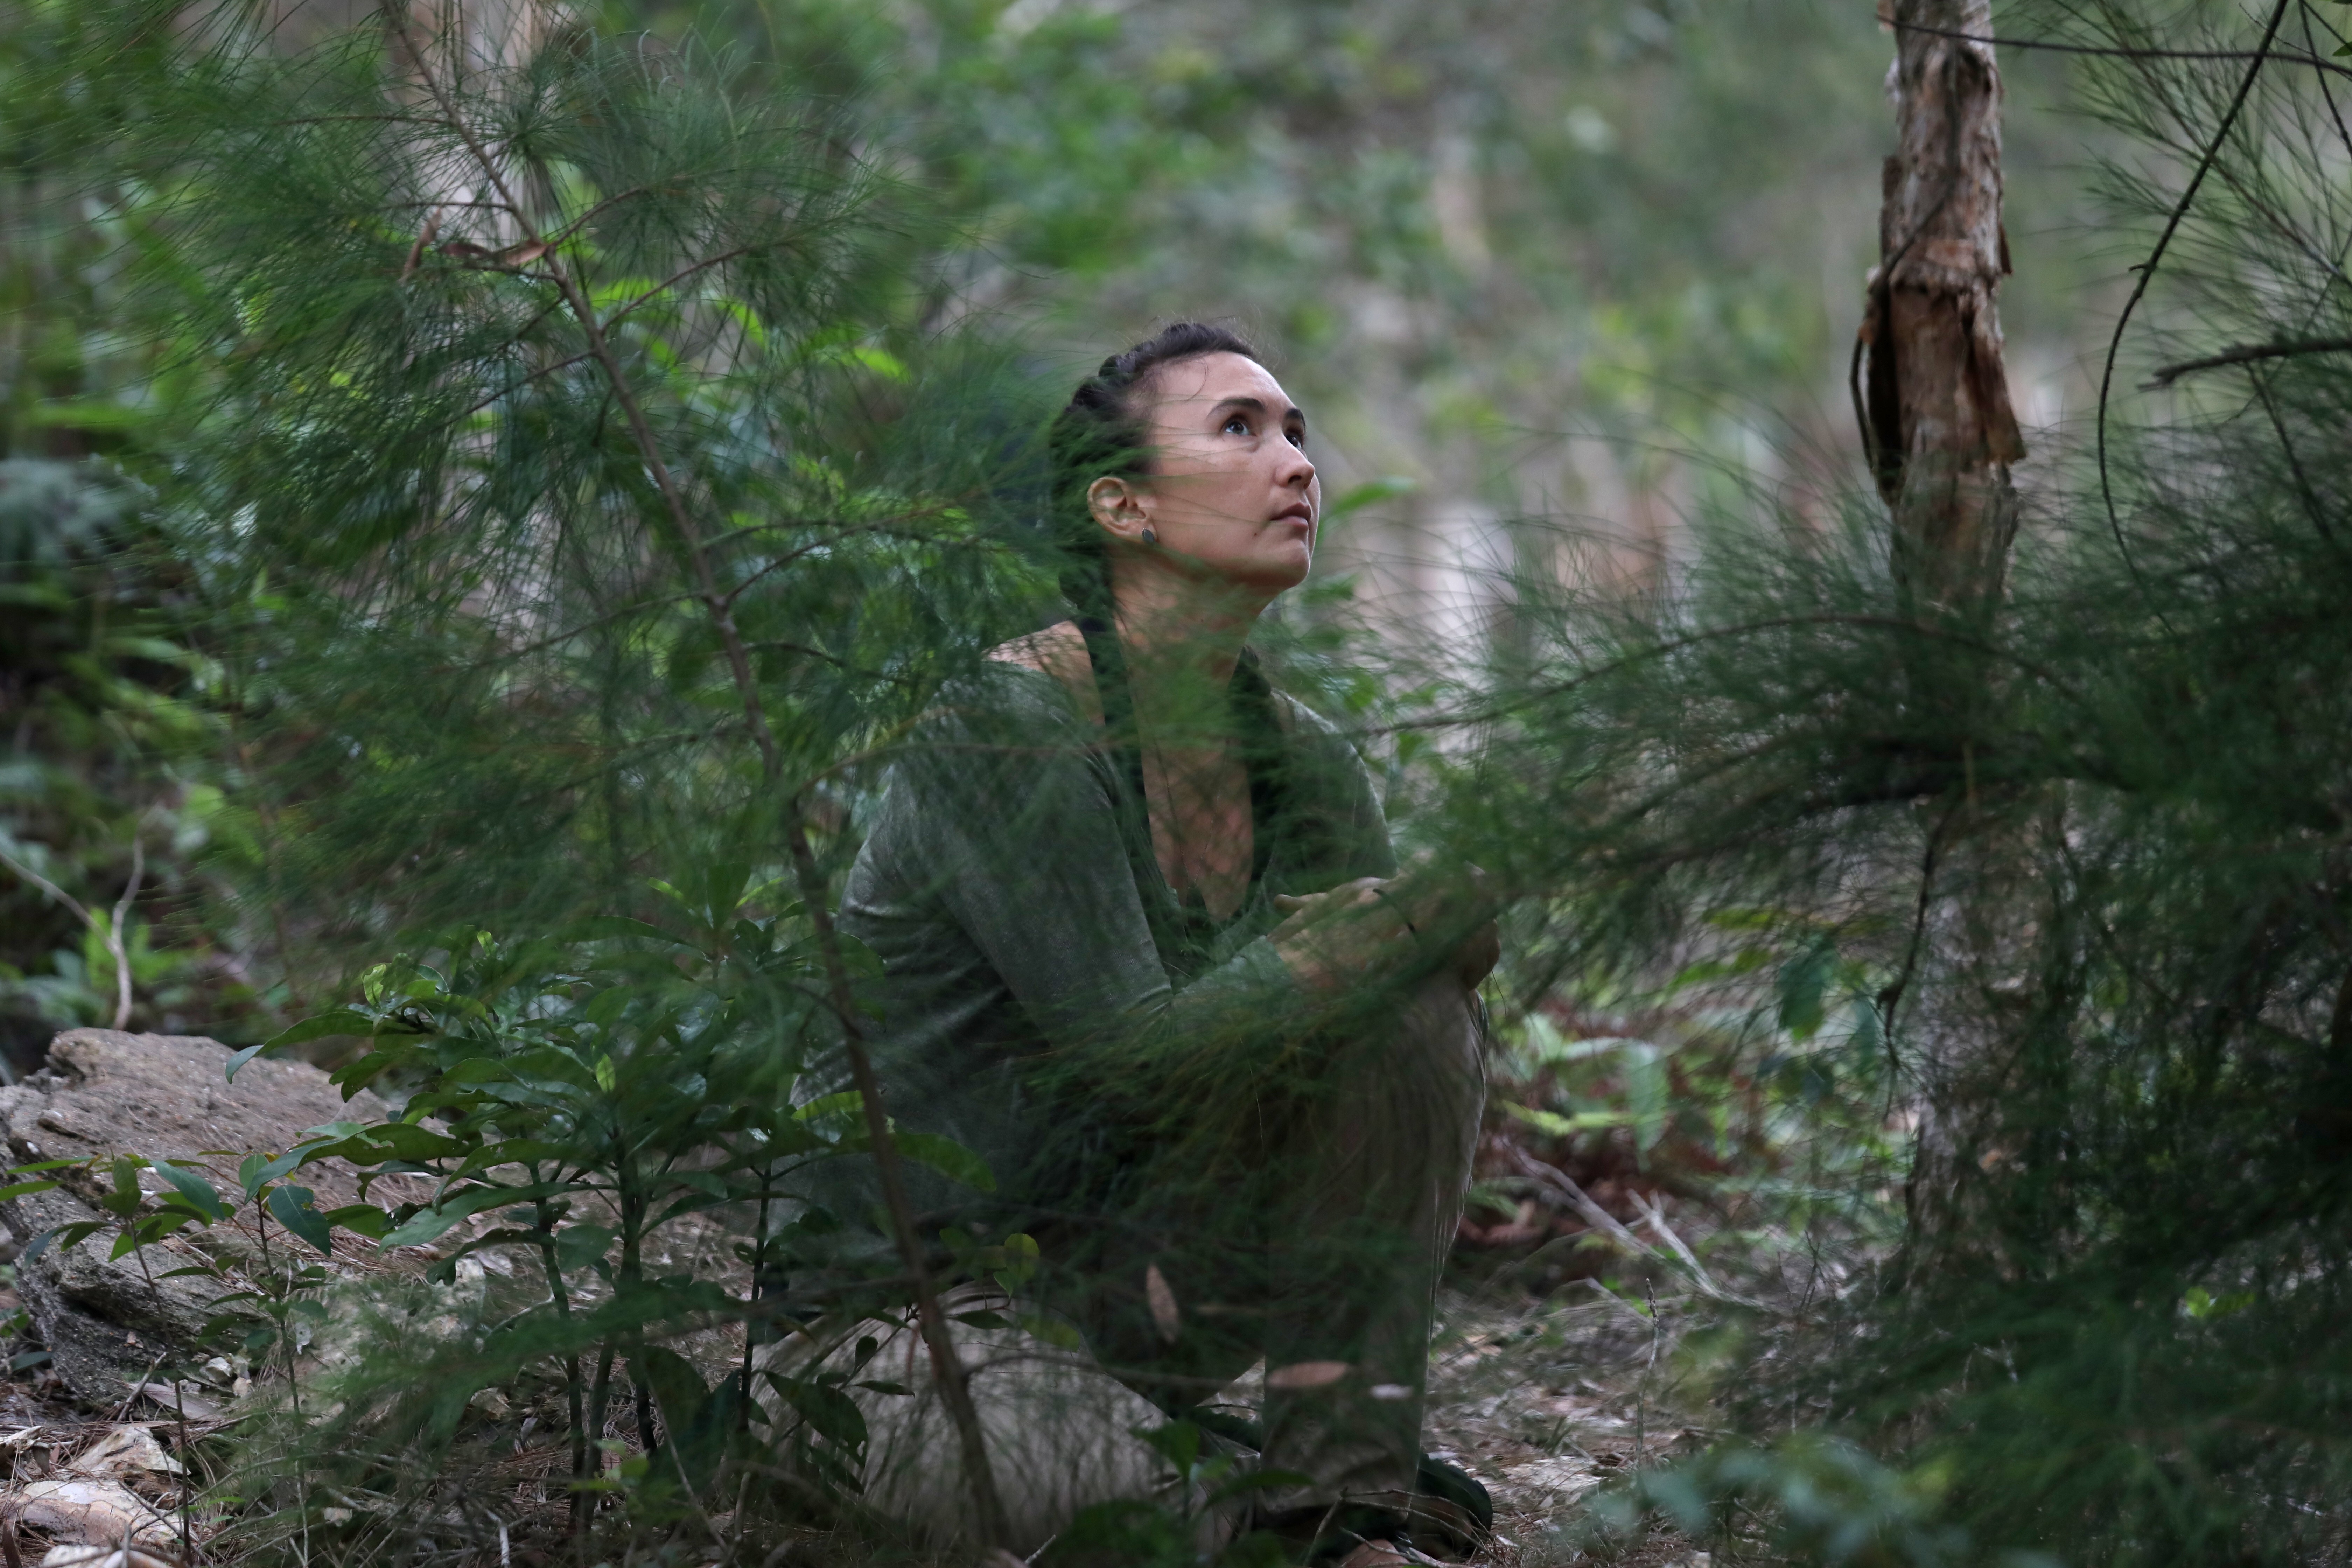 Jasmine Nunns, a certified forest therapy guide, founded her Hong Kong company, Kembali, to encourage city residents to reconnect with nature through forest therapy walks and workshops. Photo: Xiaomei Chen